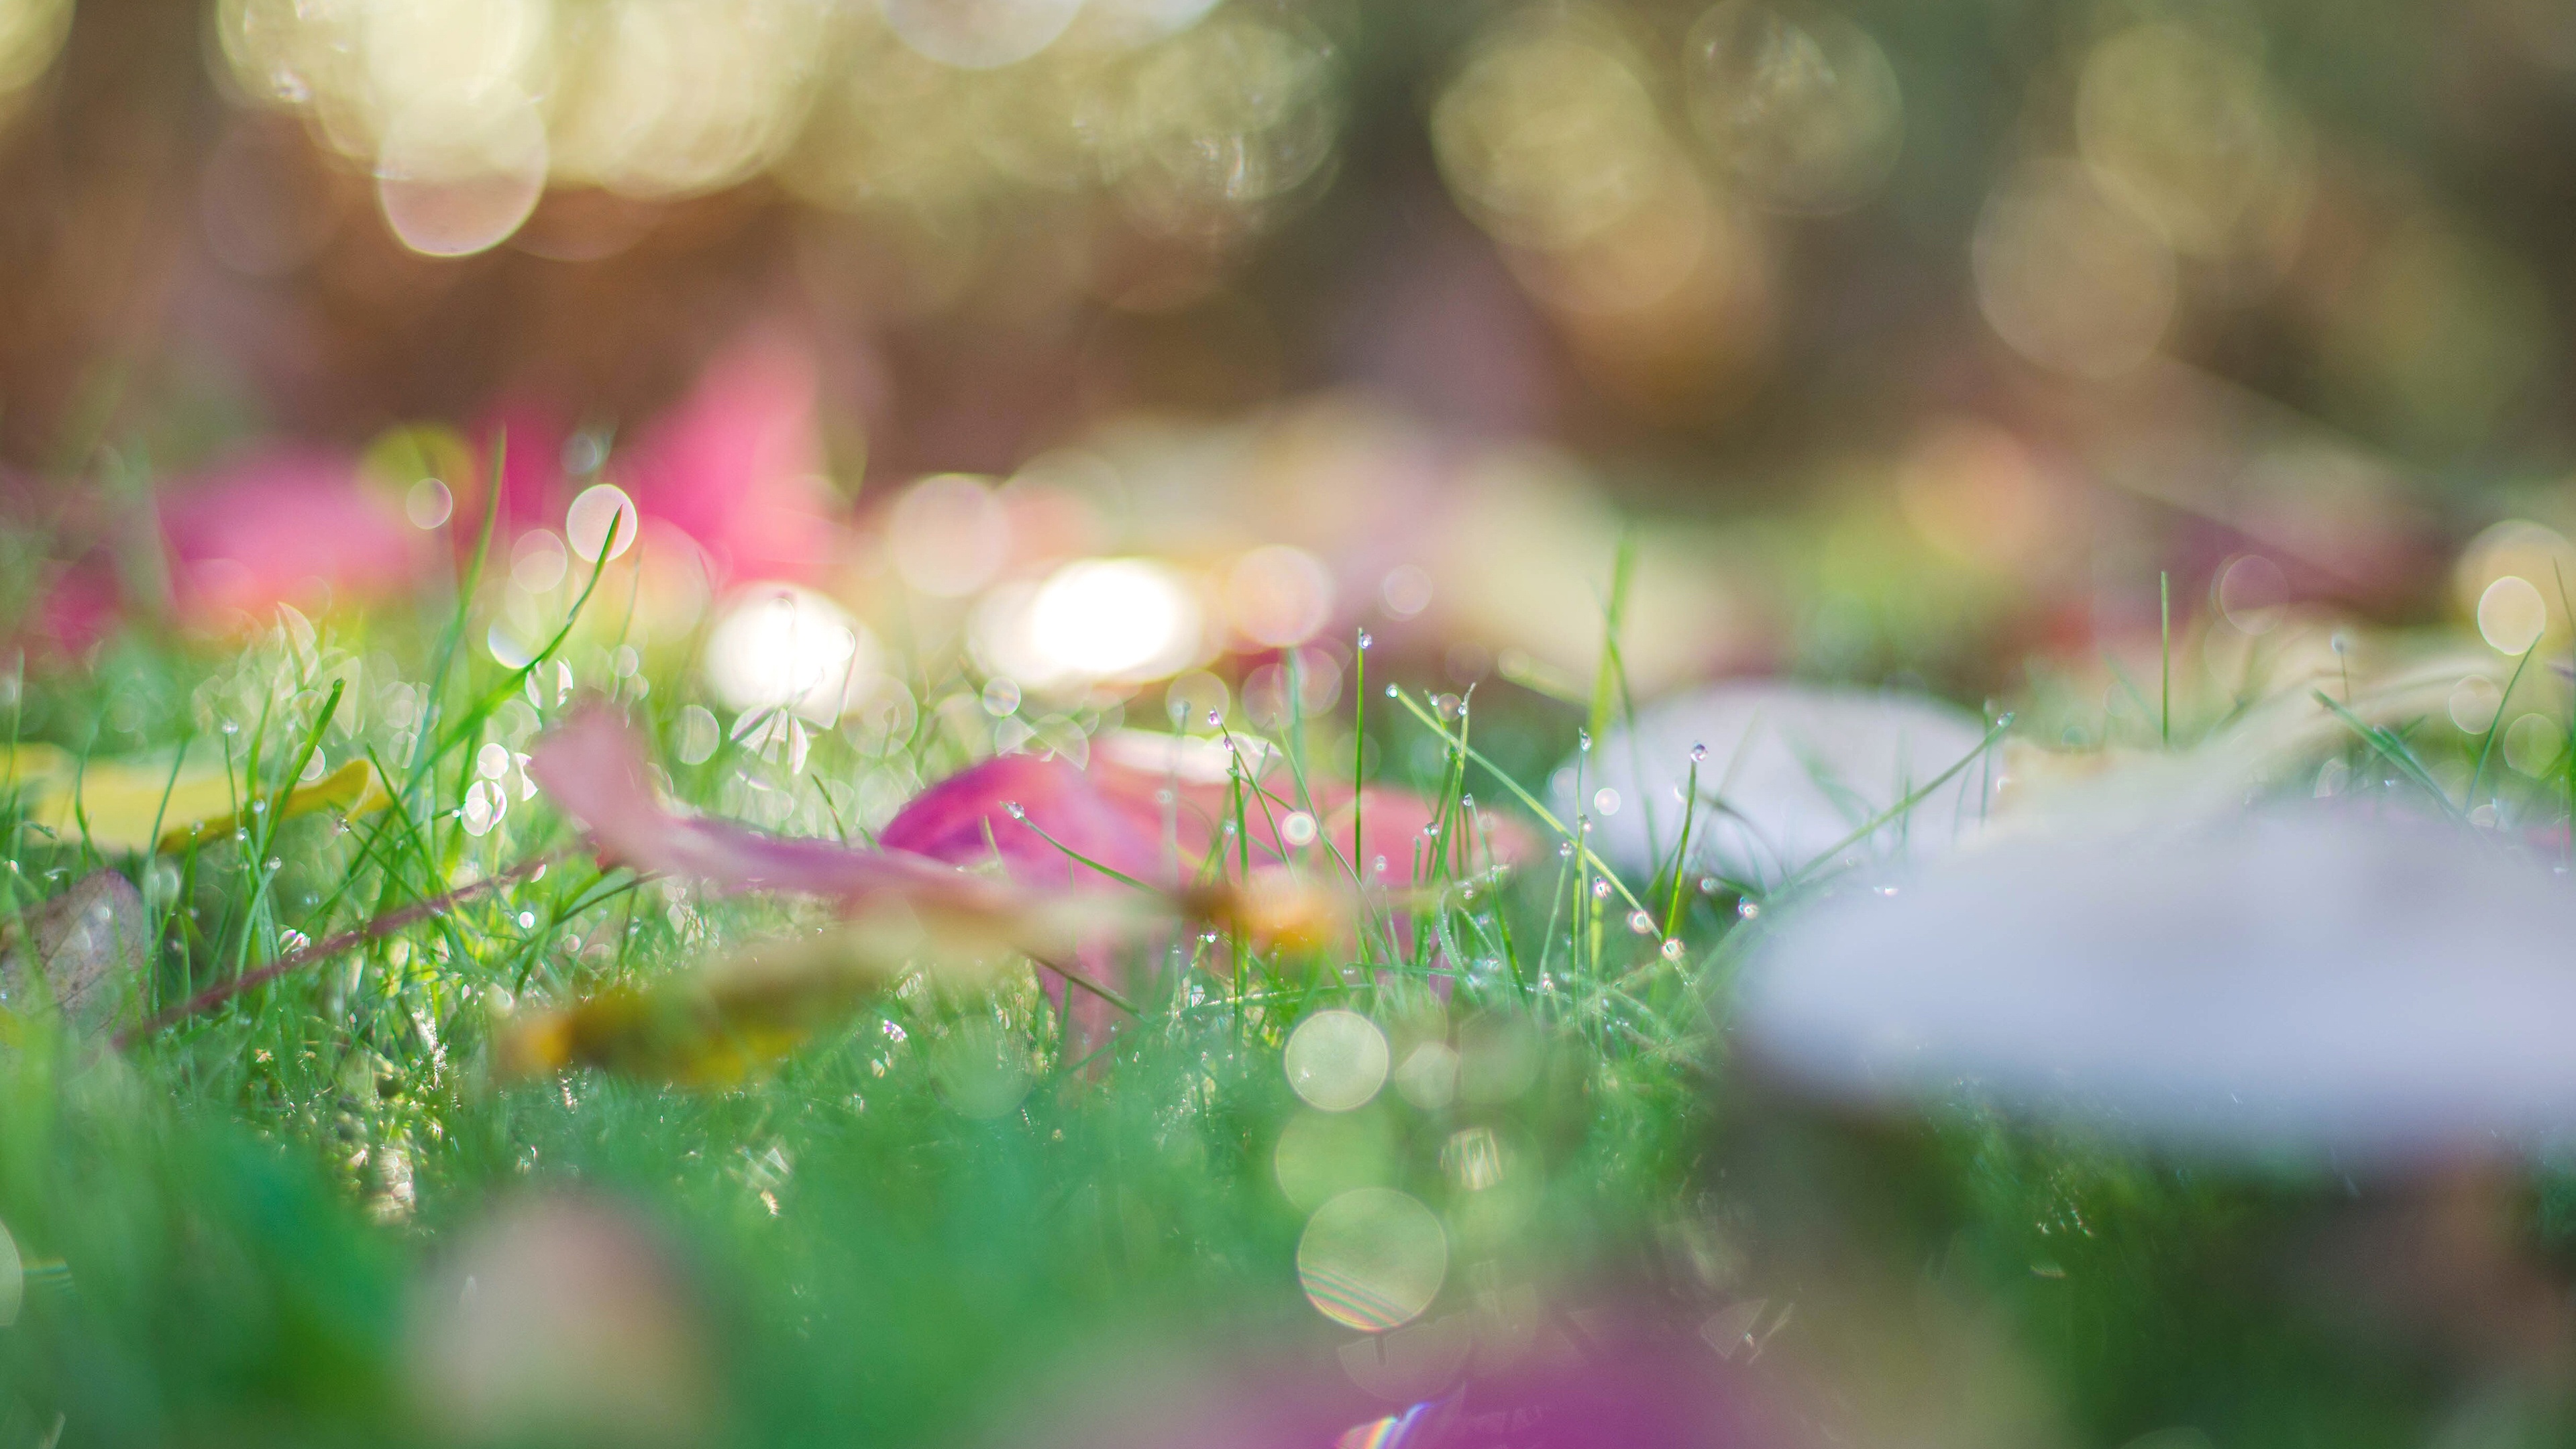 Water Droplets on Green Grass. Wallpaper in 3840x2160 Resolution